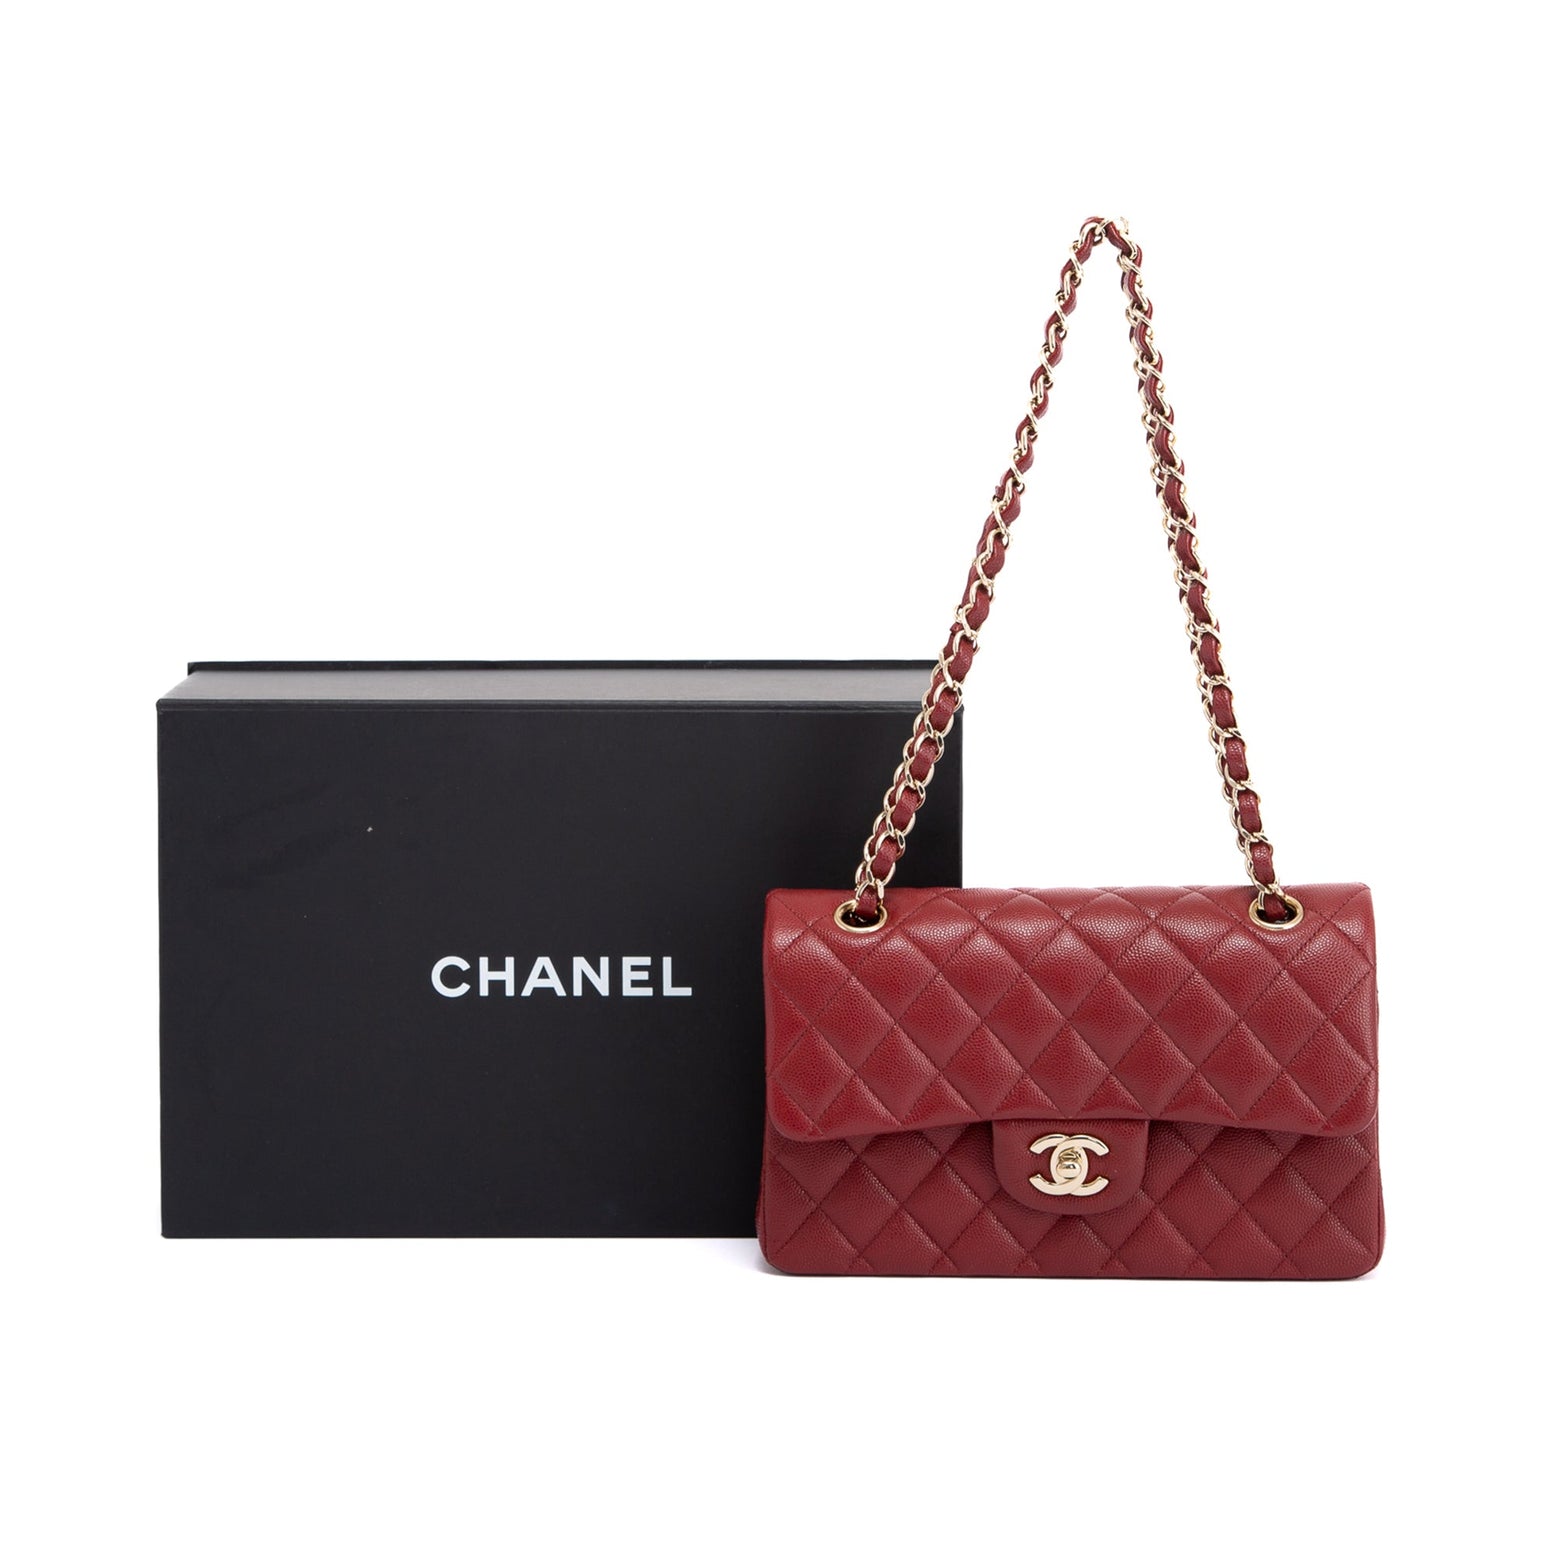 Chanel Mini Timeless Classic Flap Bag in Bordeaux Caviar  SOLD